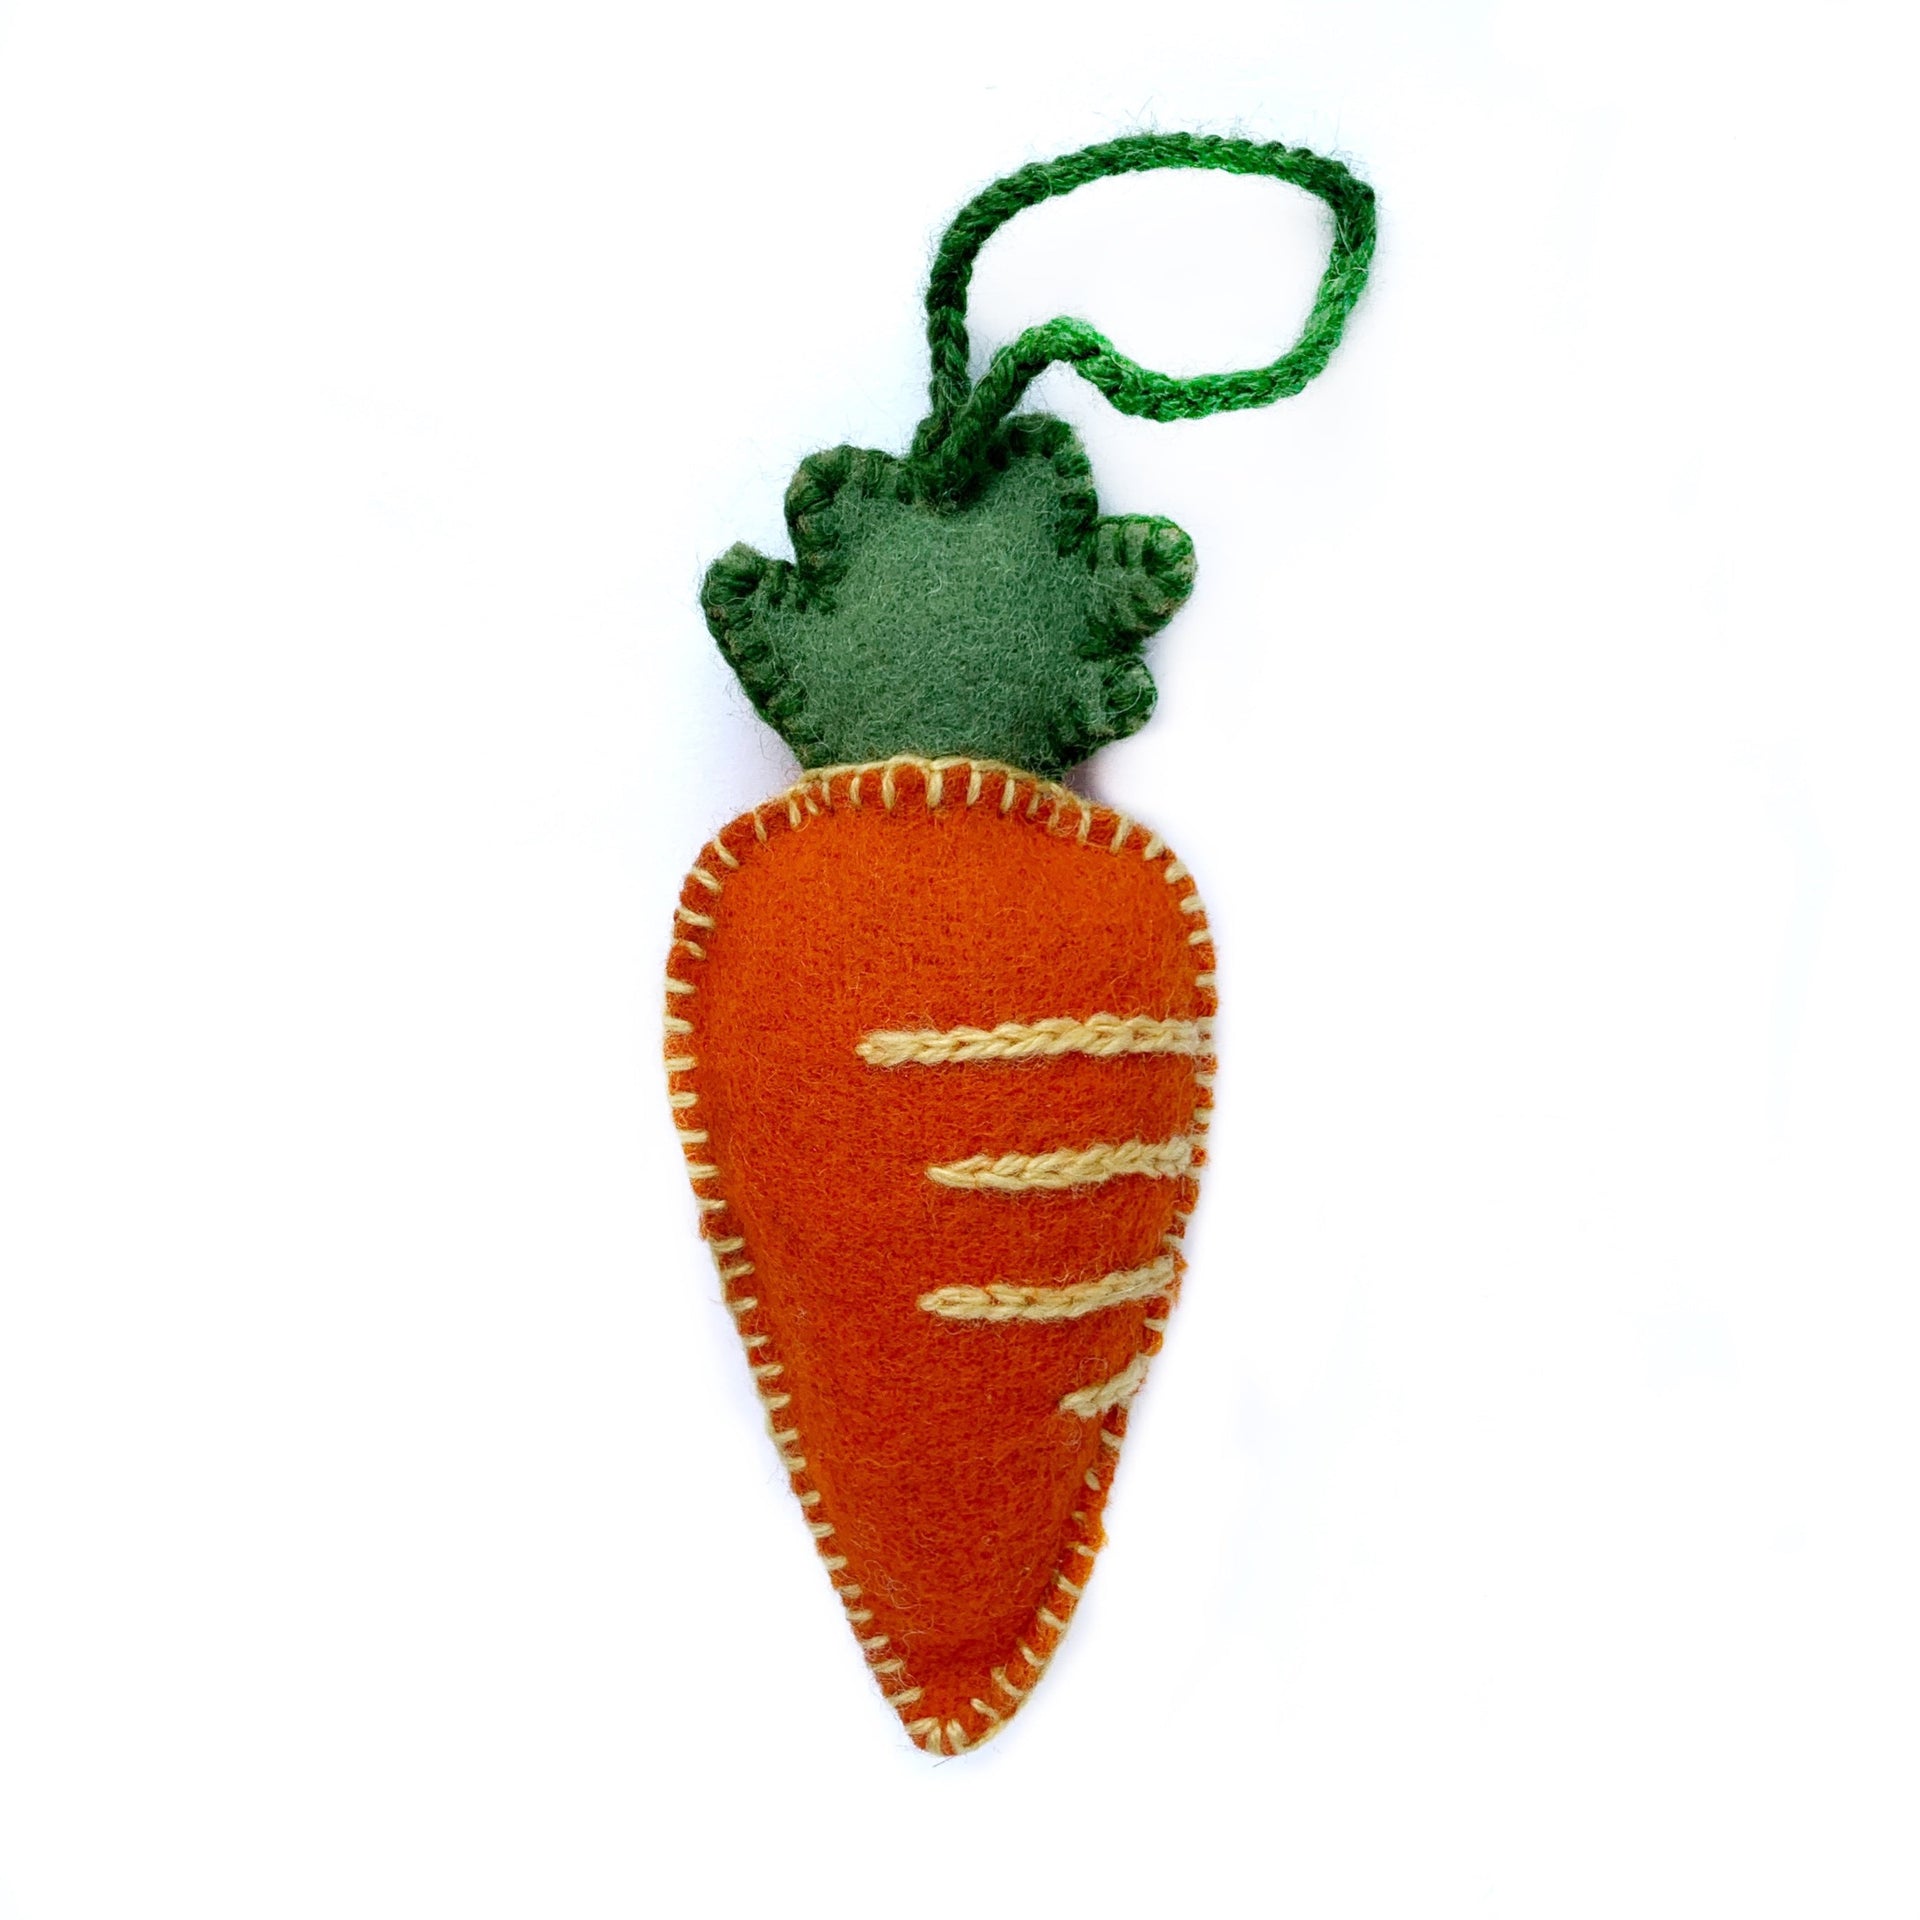 Handmade embroidered wool carrot Easter ornament